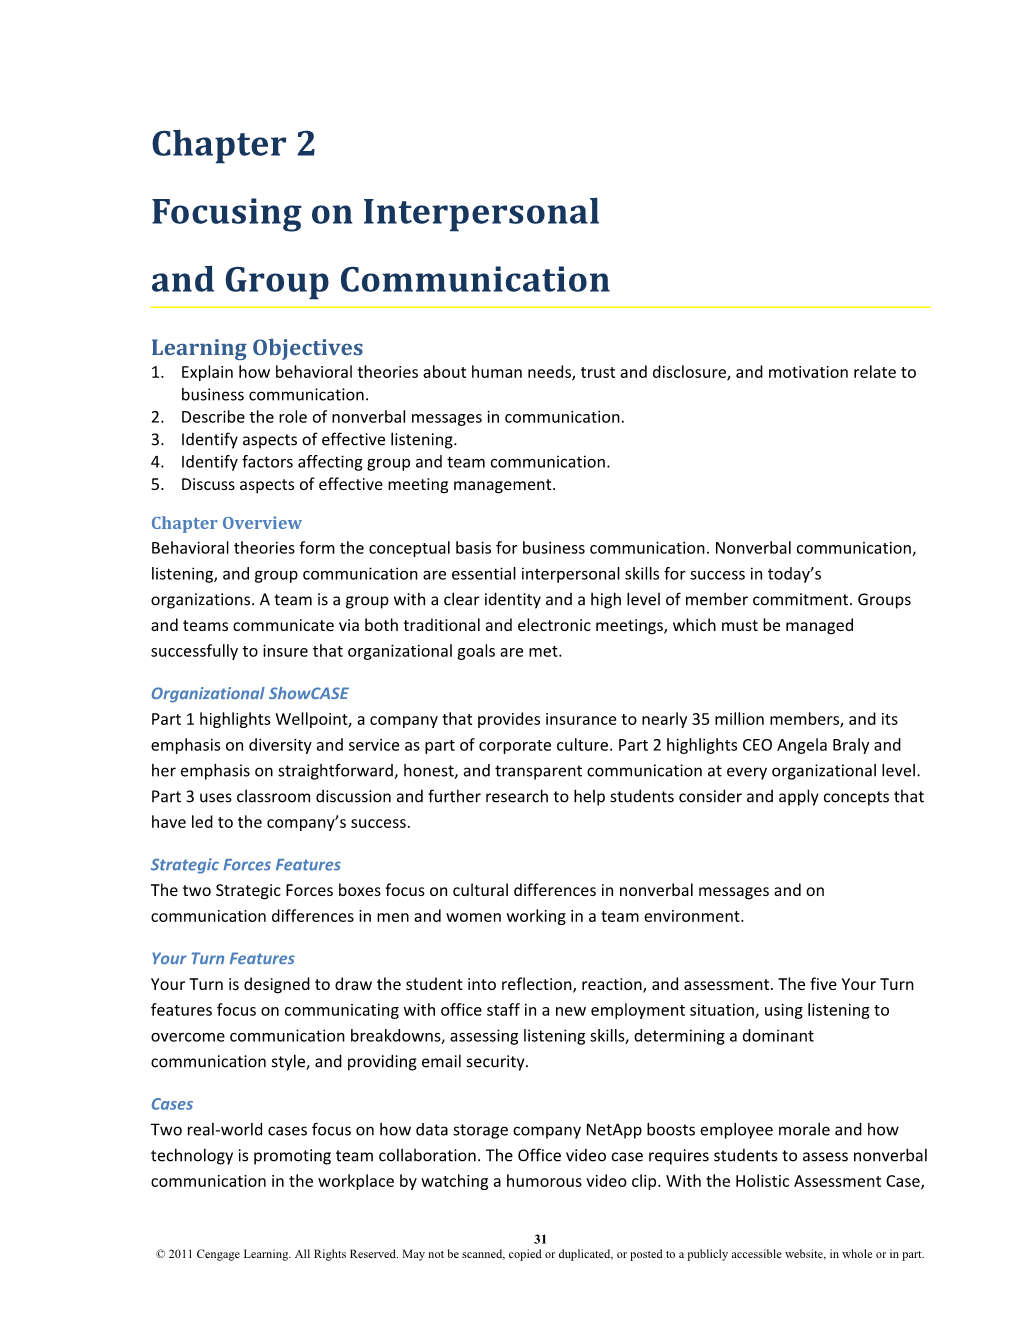 Chapter 2 Focusing on Interpersonal and Group Communication1